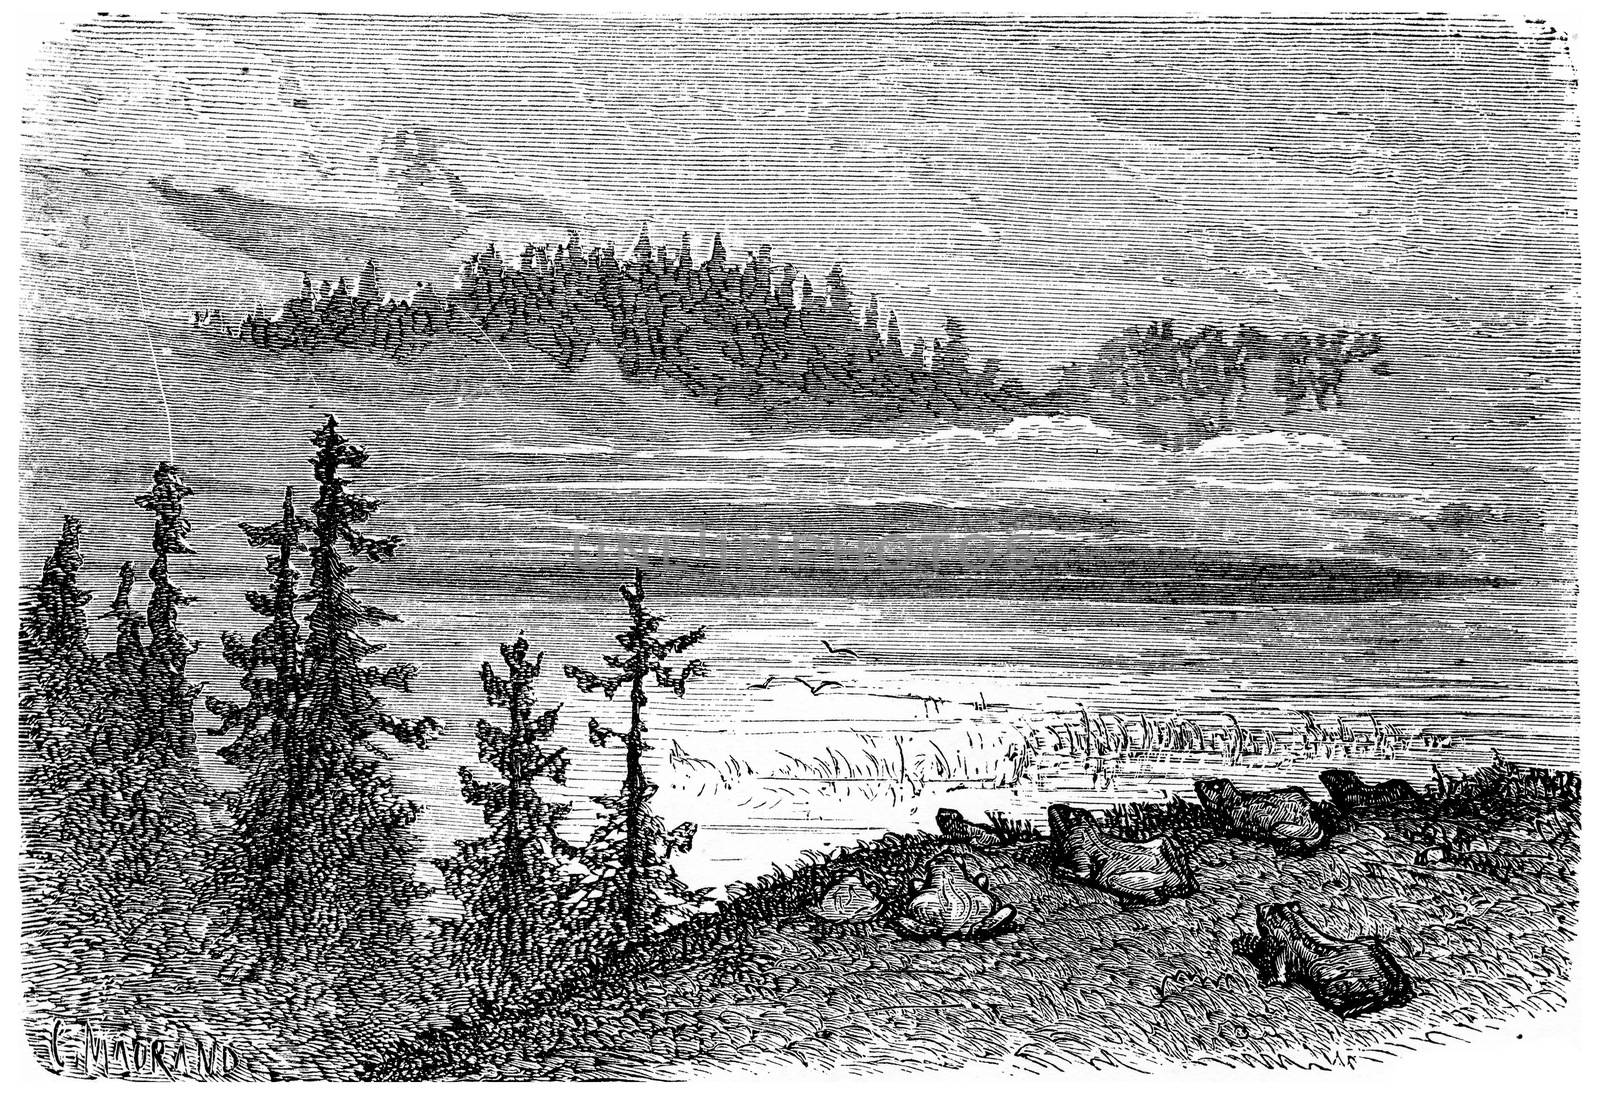 Lake of the Fairies, vintage engraved illustration. From Chemin des Ecoliers, 1861.
